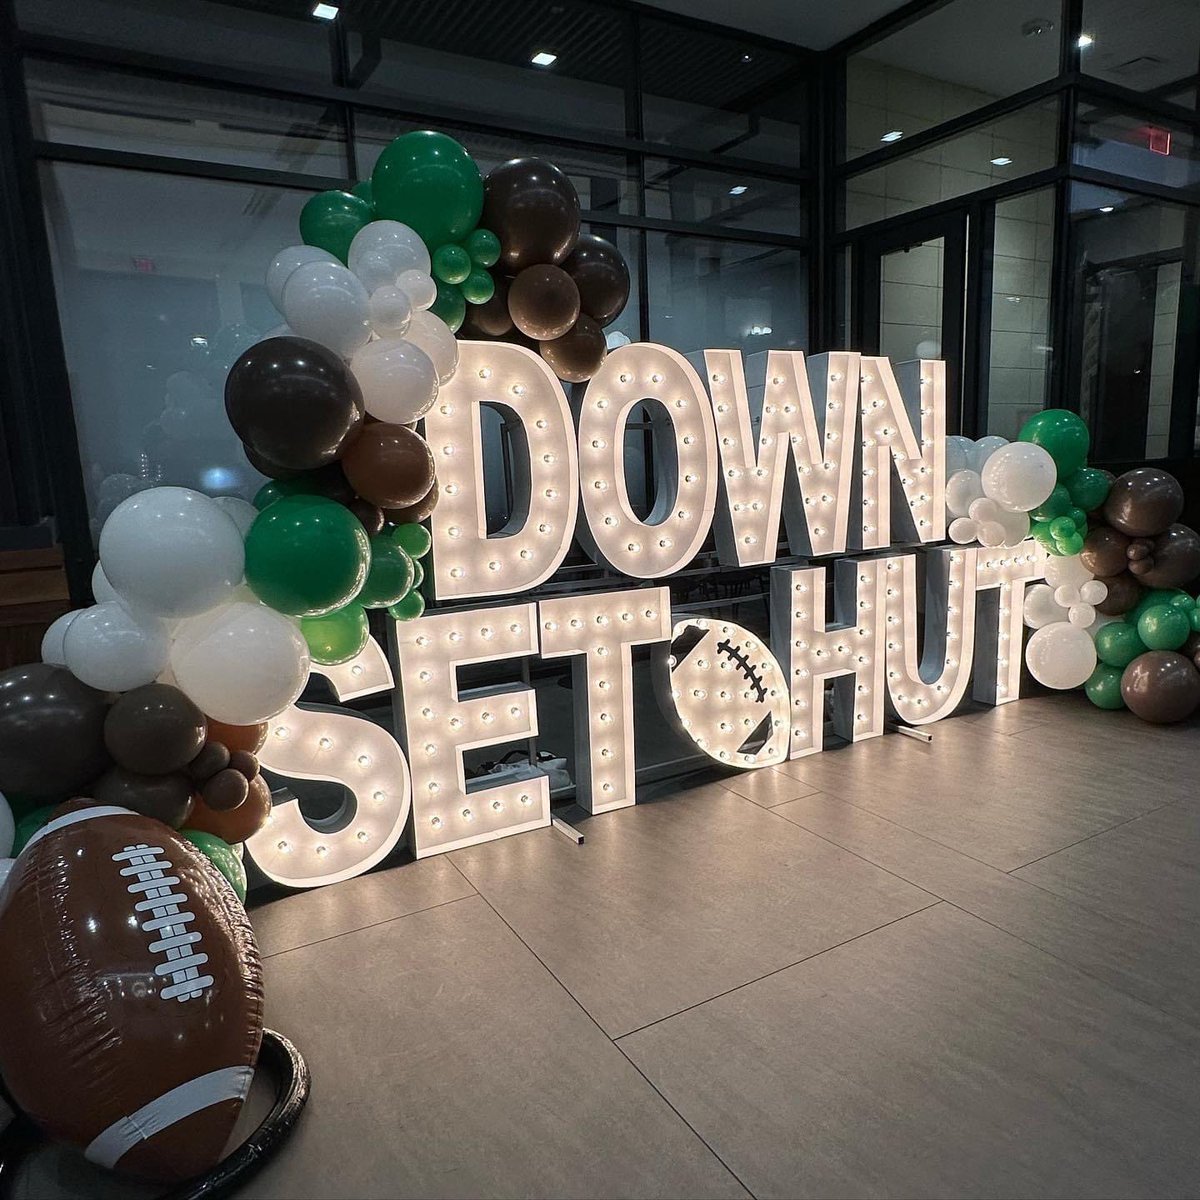 Who else is ready for football season?  It will be here before we know it…. Nothing like our letters to make your watch parties LIT 

#football #marqueeletters #watchparties #runitback #okcevents #alphalitokc #letsgo #downsethut #fyp #trending #touchdown